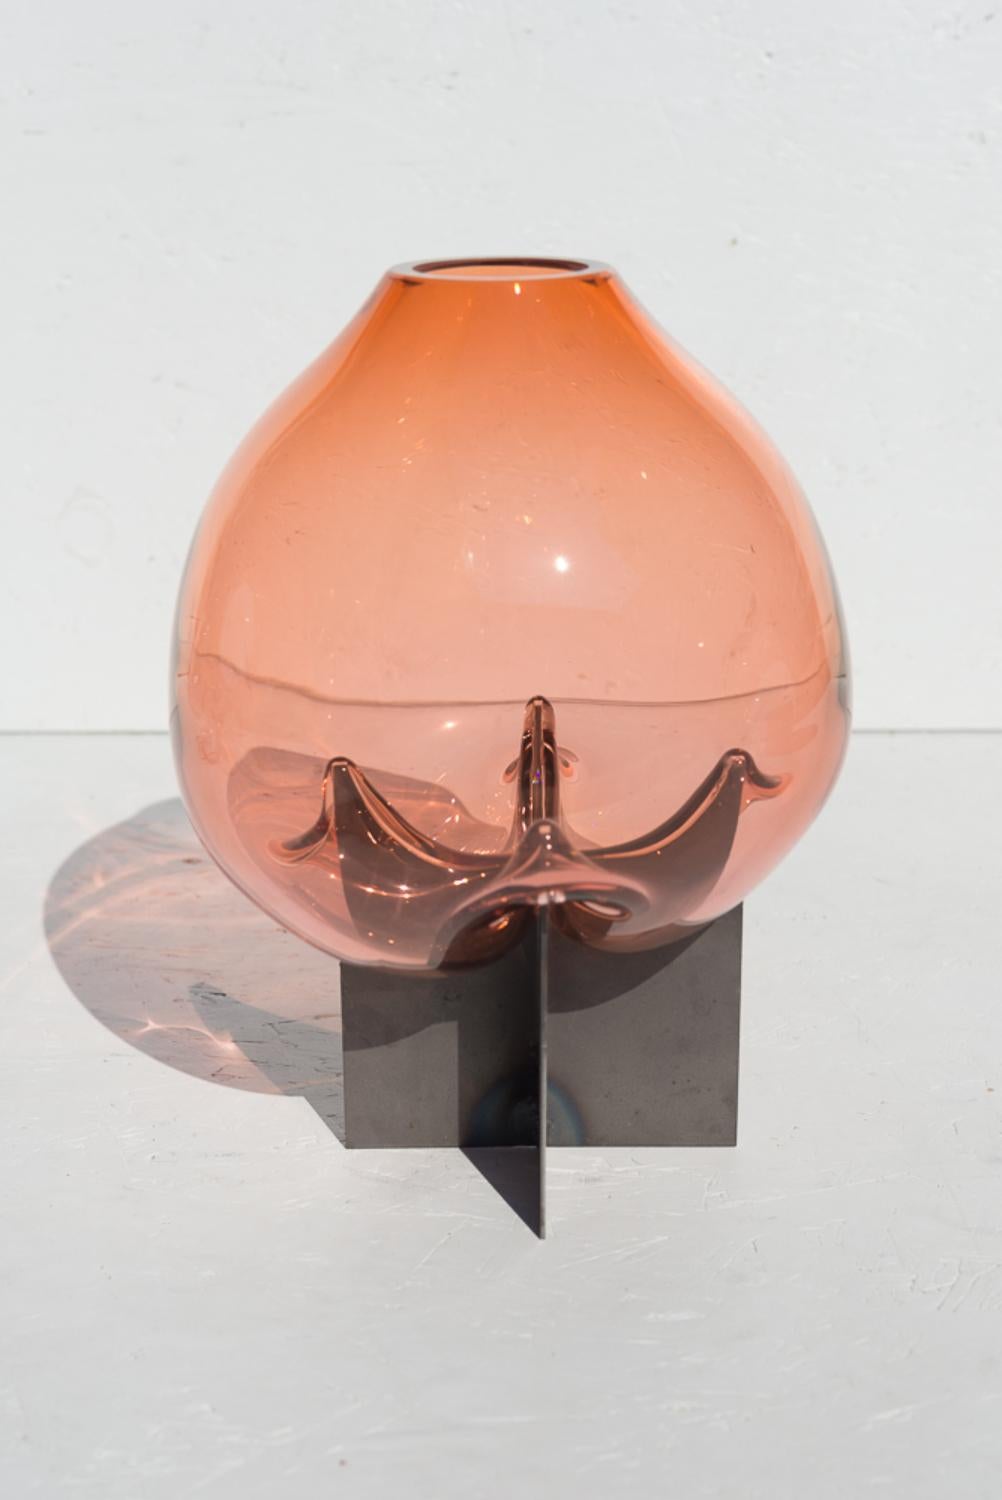 Pink pierced table vase by Studio Thier & van Daalen
Dimensions: W 35 x D 25 x H 25cm
Materials: steel, glass

The studio was keen to find a way to display the fluidity of glass. Therefore they sought the contrast between the industrial steel